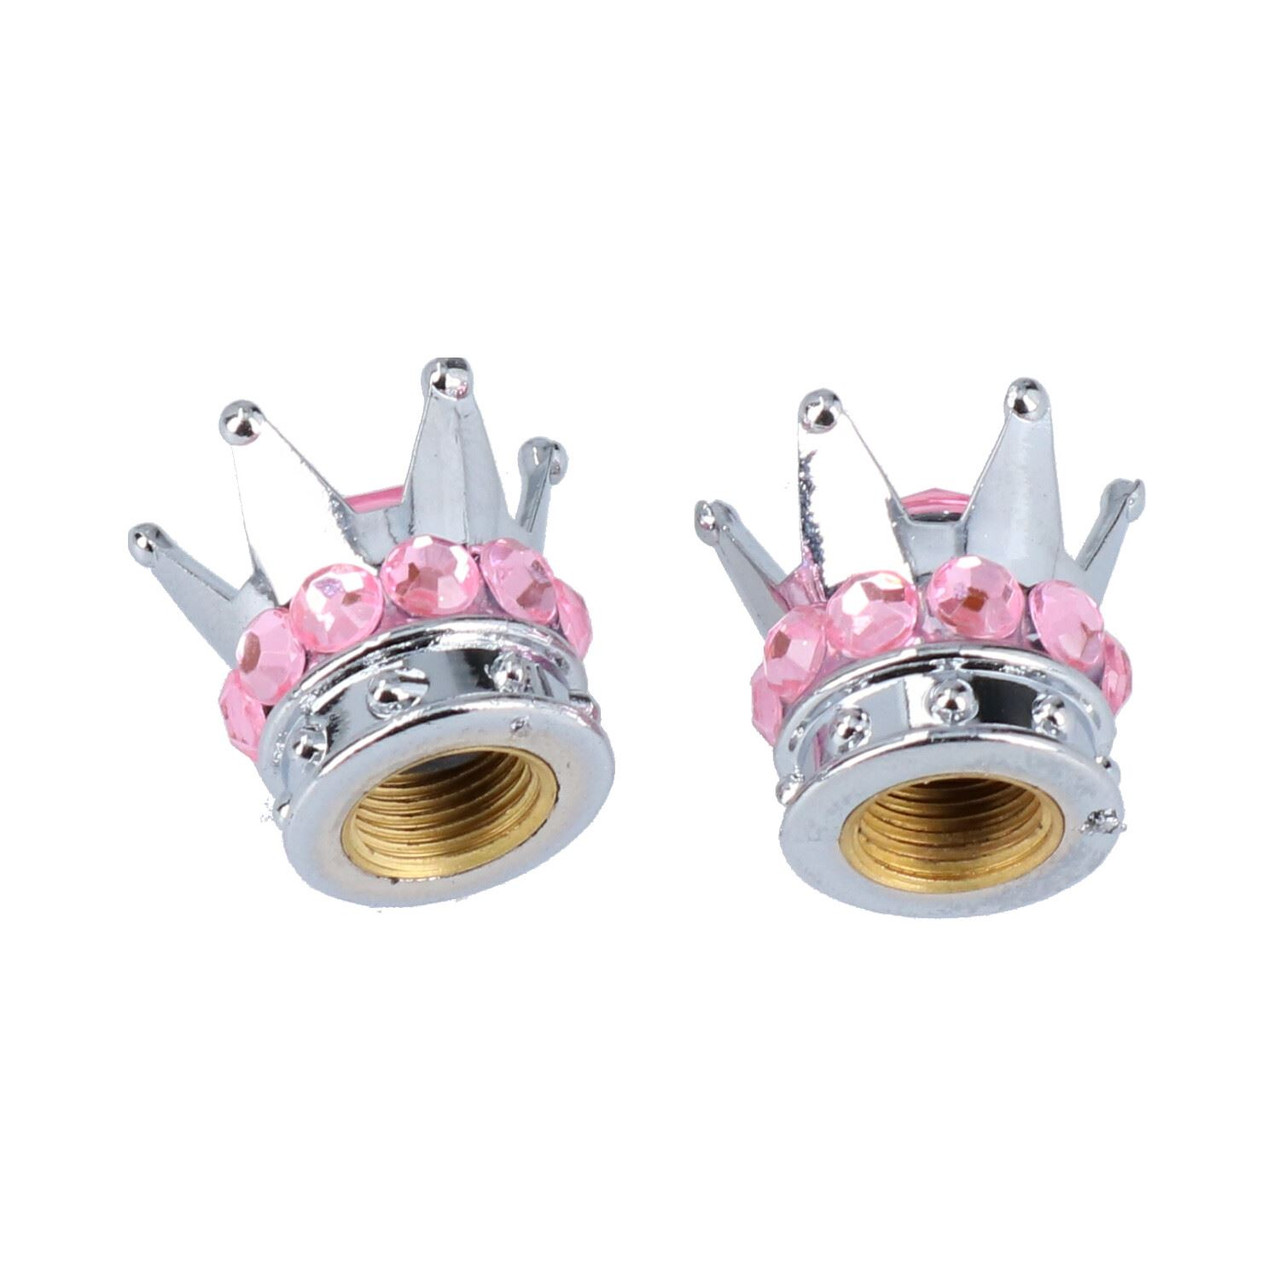 Details about   Pink Crown Valve Caps Wheel Tyre Dust Cap Air Stem Cover Bike Cycle Car Vehicle 